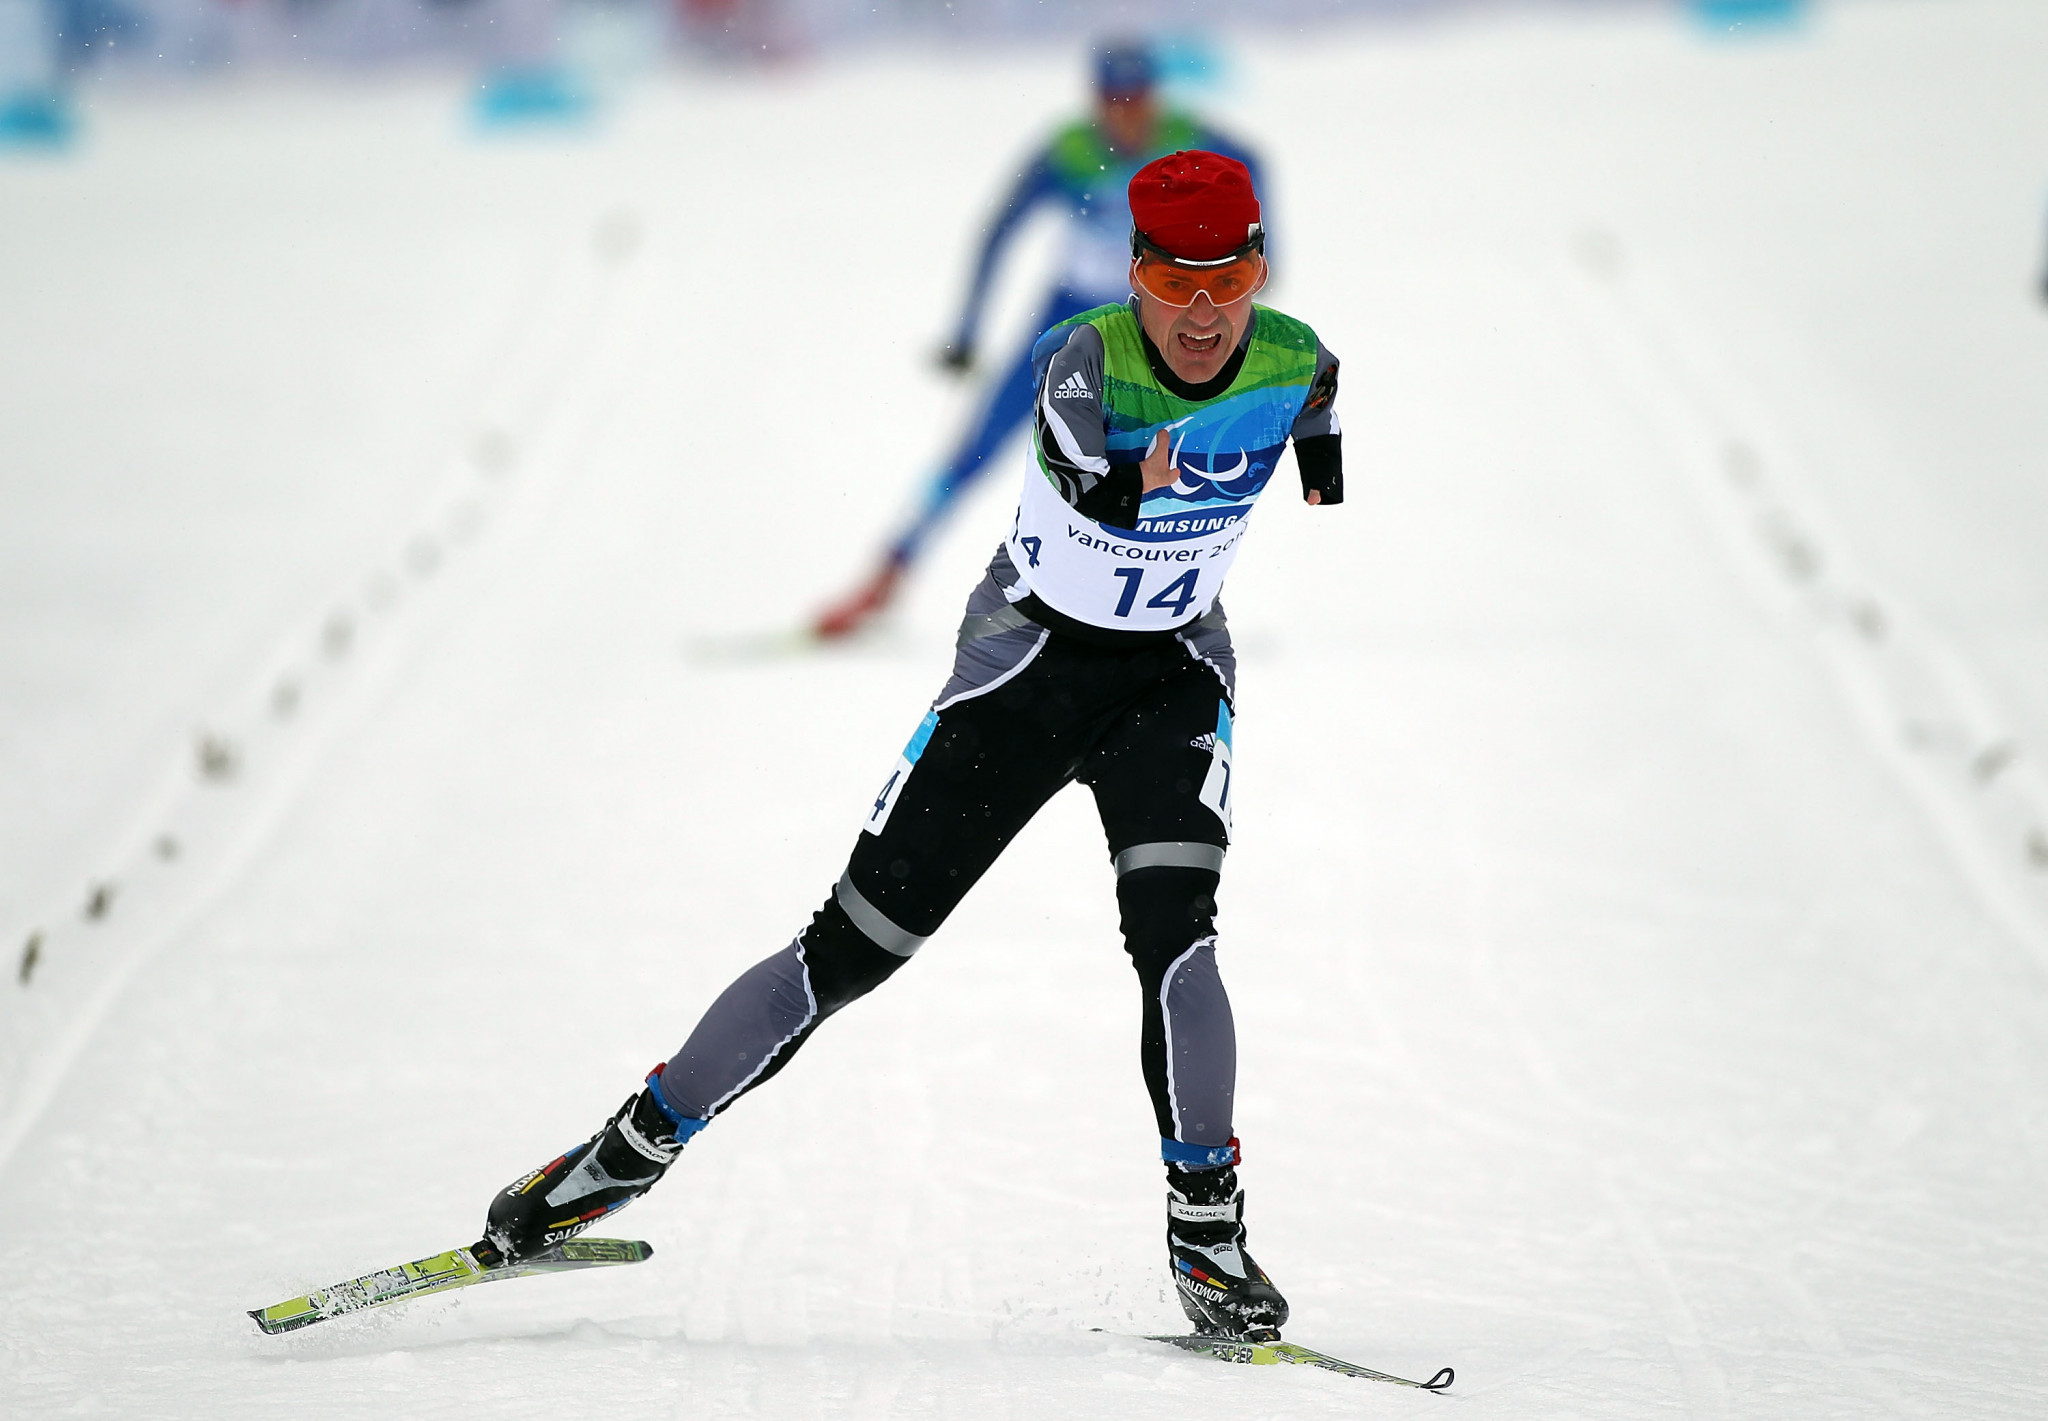 Para biathlon is due to be one of three sports at the Milan Cortina 2026 Winter Paralympic Games offering gender parity in terms of medals available ©Getty Images